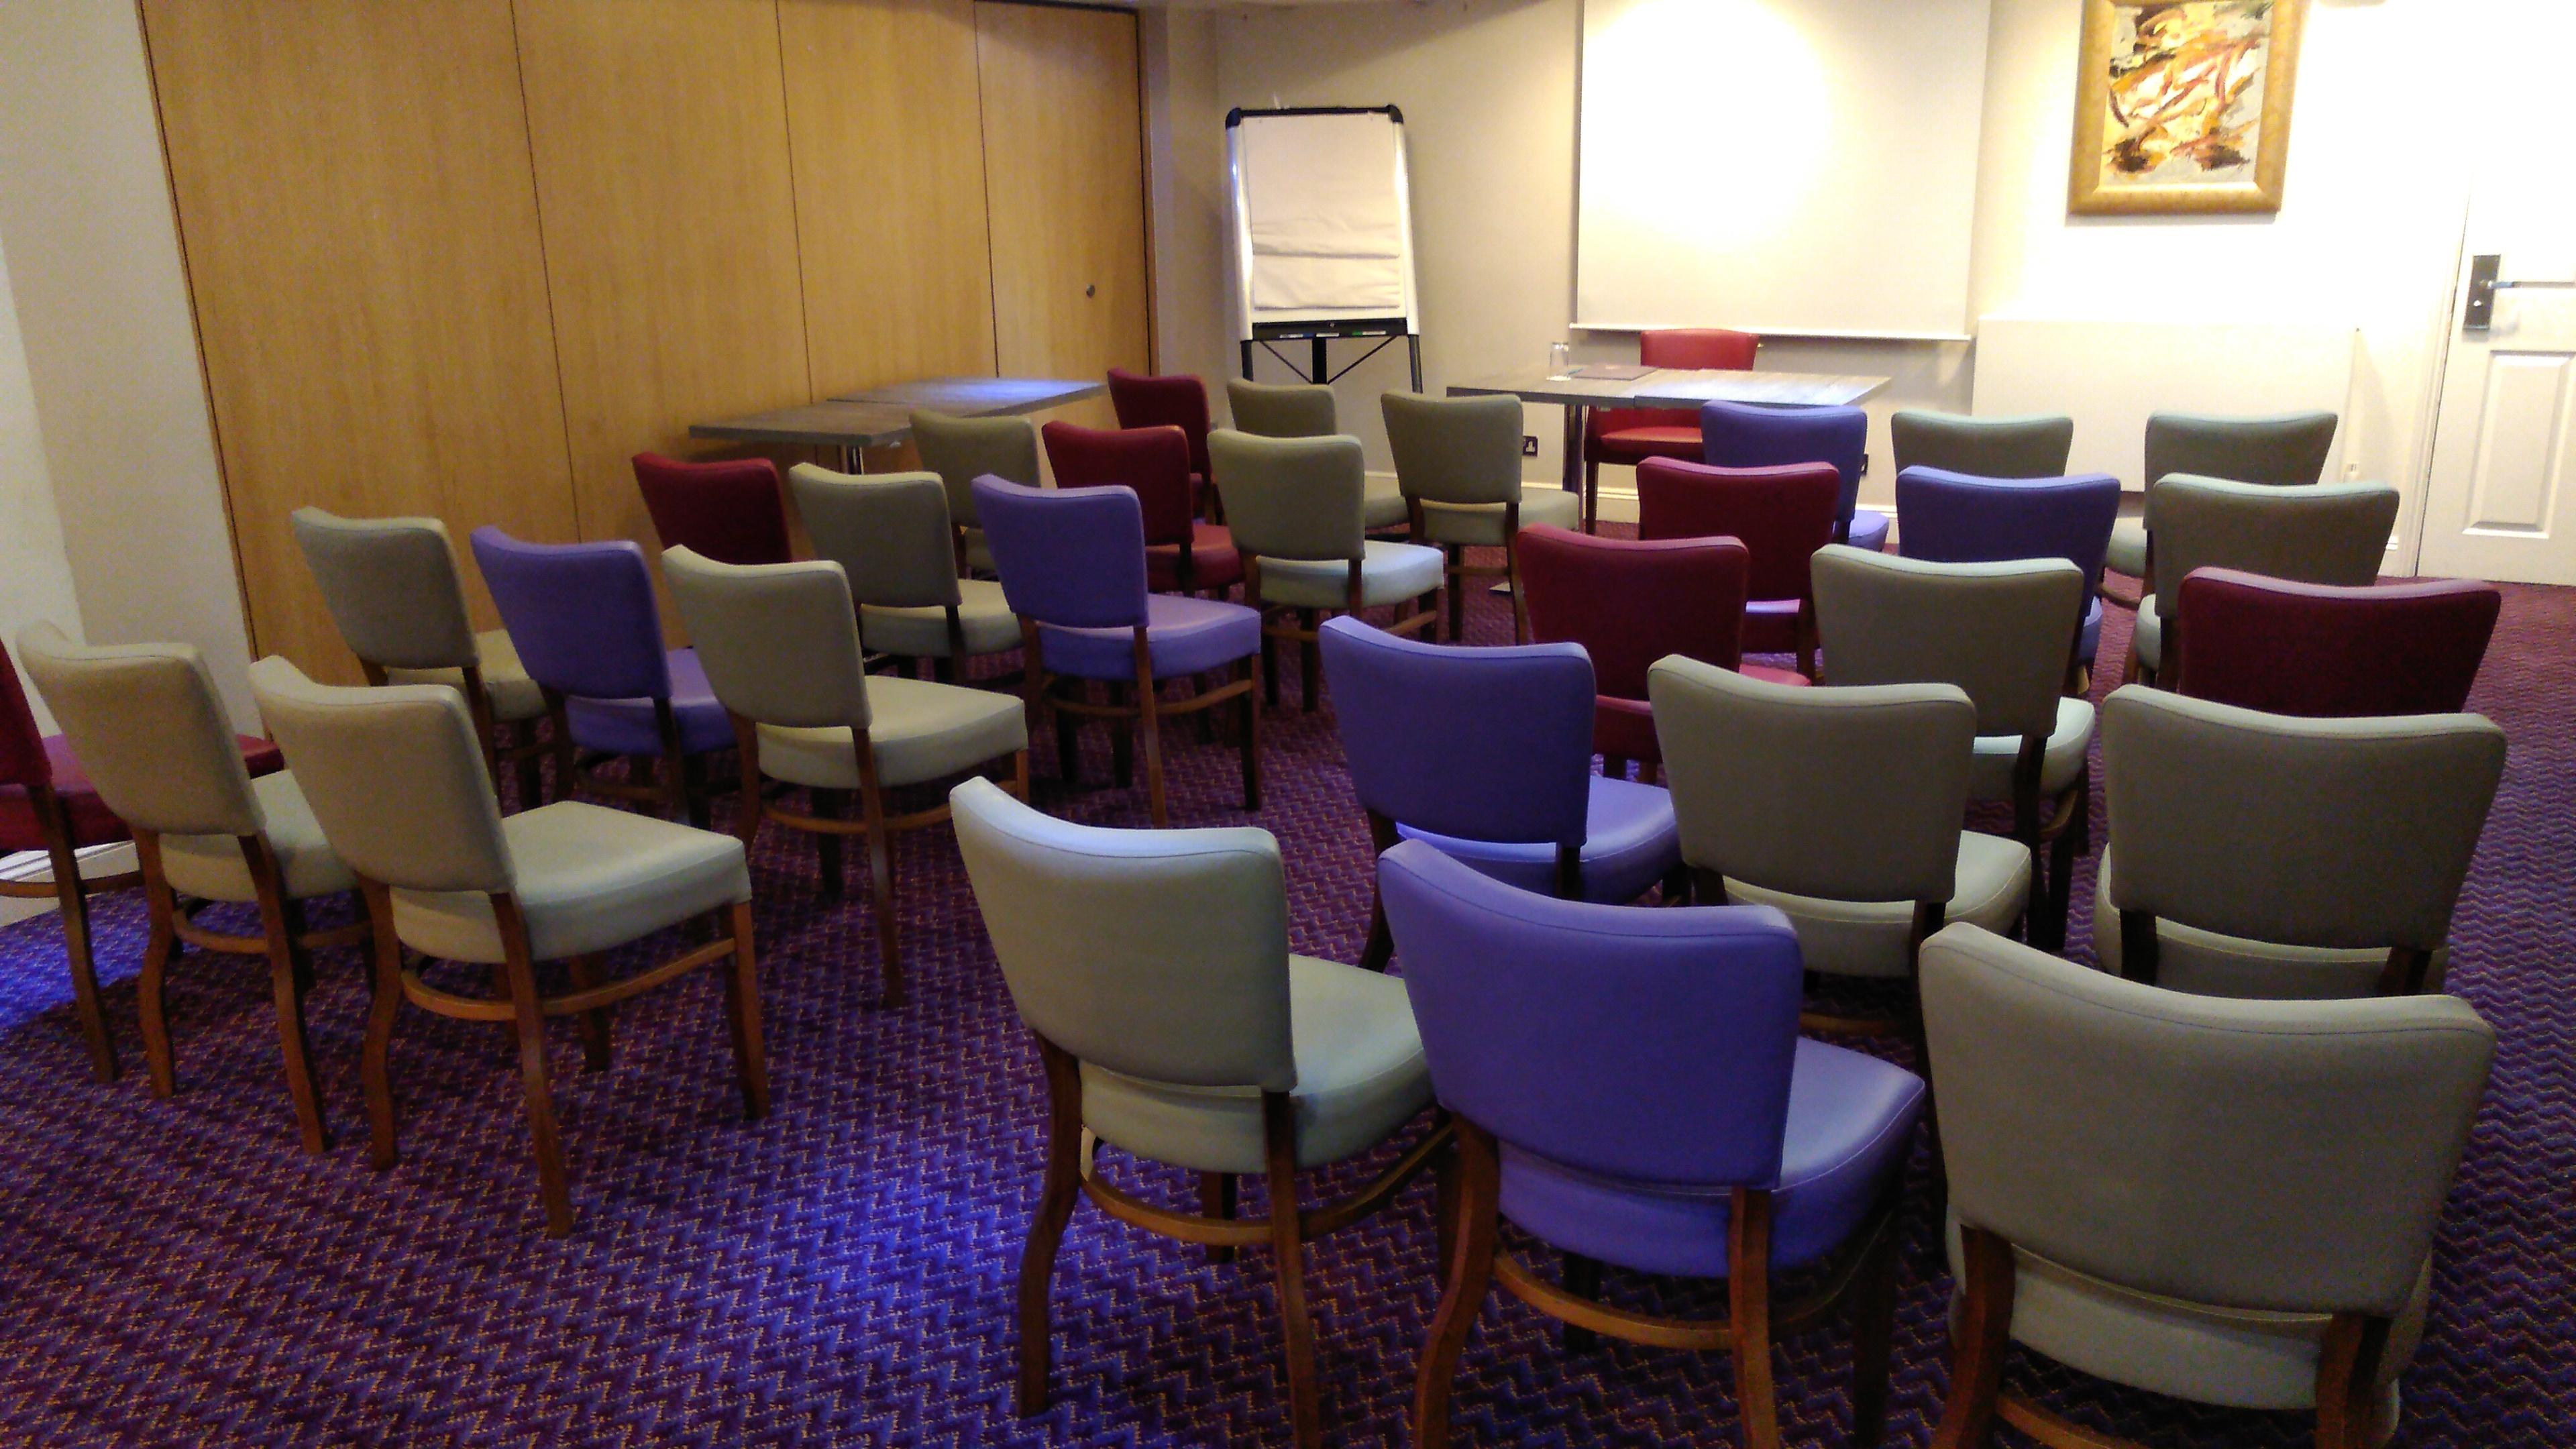 The Queensgate Hotel & Conference Centre, Sapphire Suite photo #3